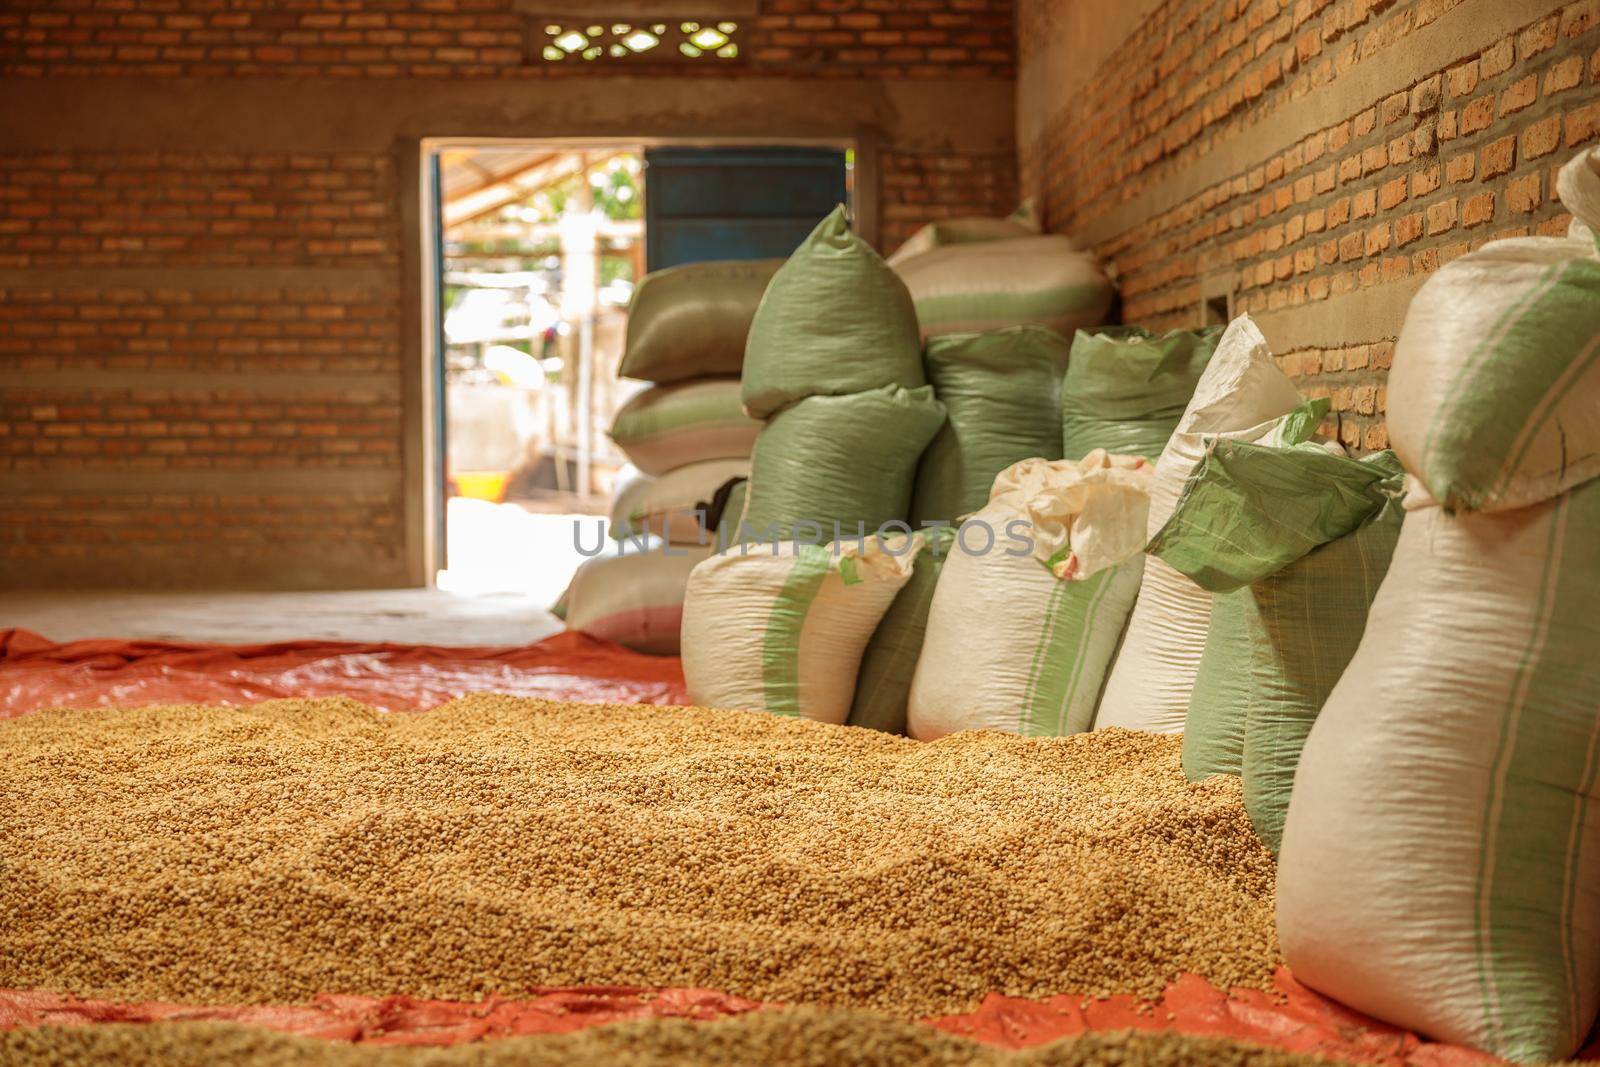 Many bags used in the production of coffee at farm in region of Rwanda